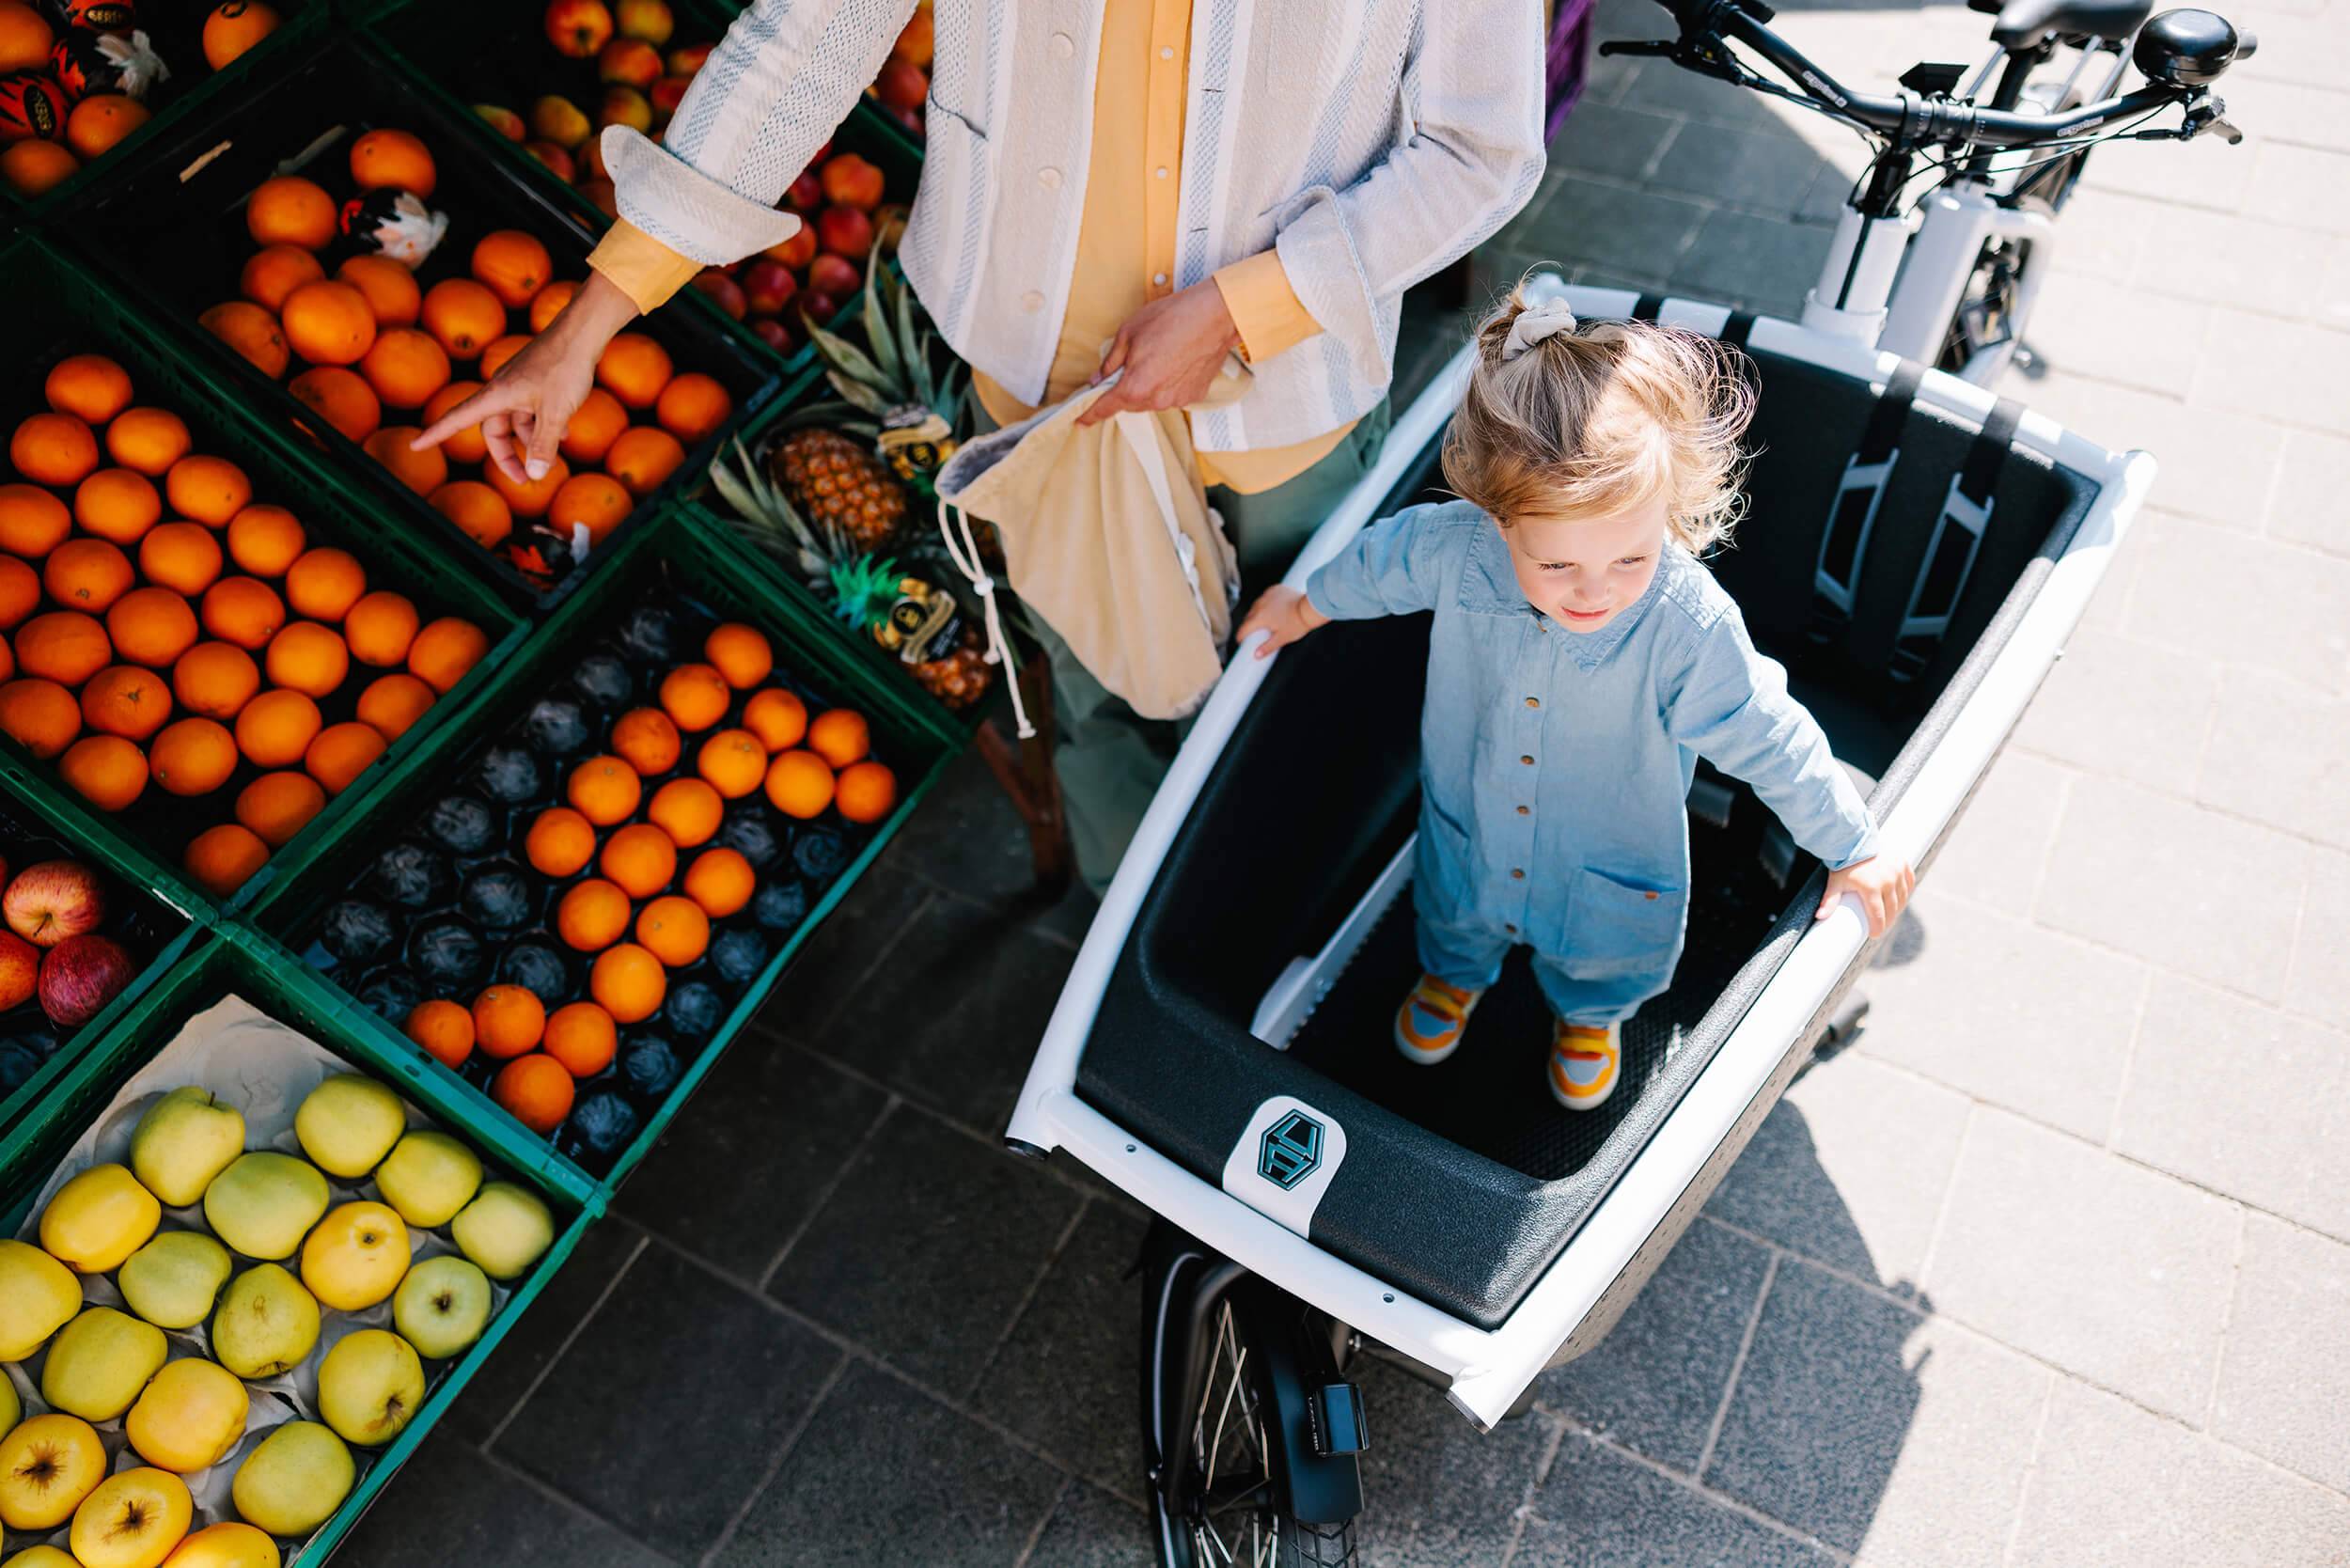 kid is standing in cargo bike while woman is buying fruits